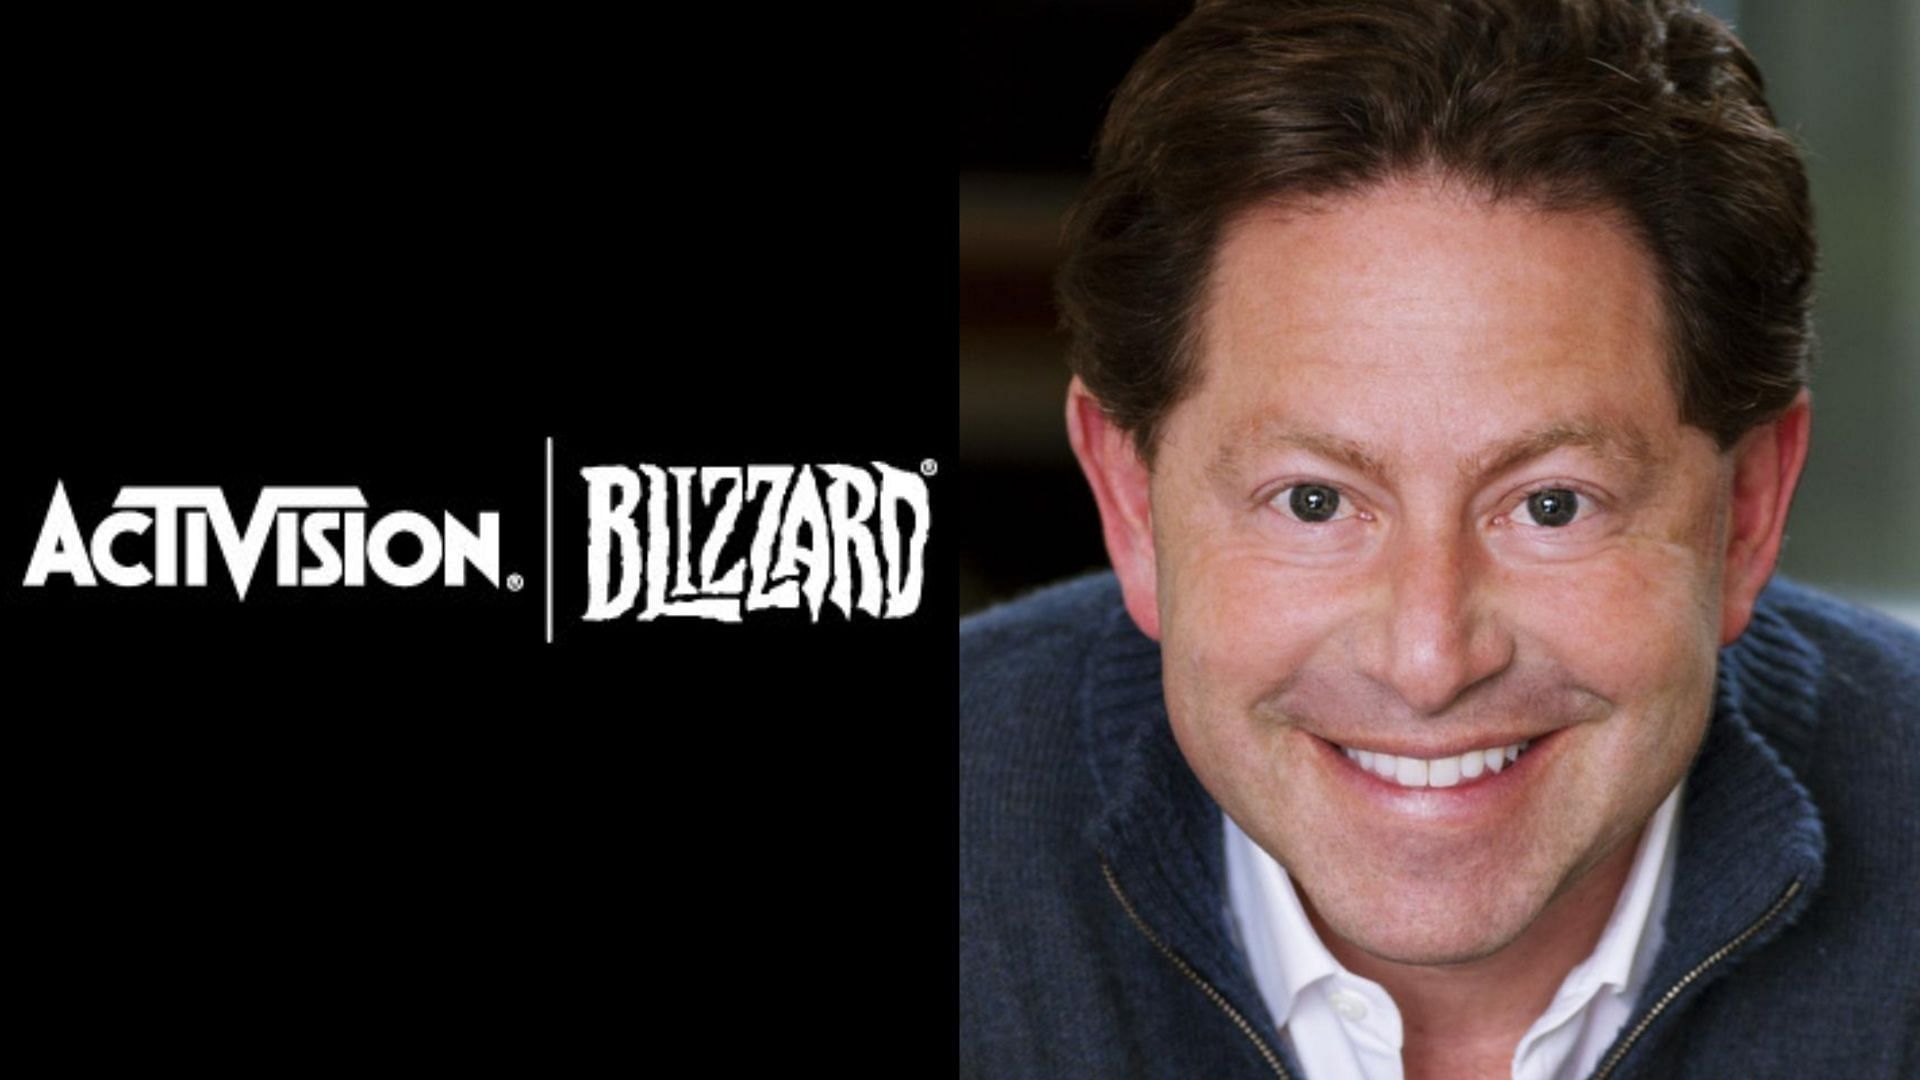 Activision Blizzard CEO is stepping down from his position (Image via Activision Blizzard)